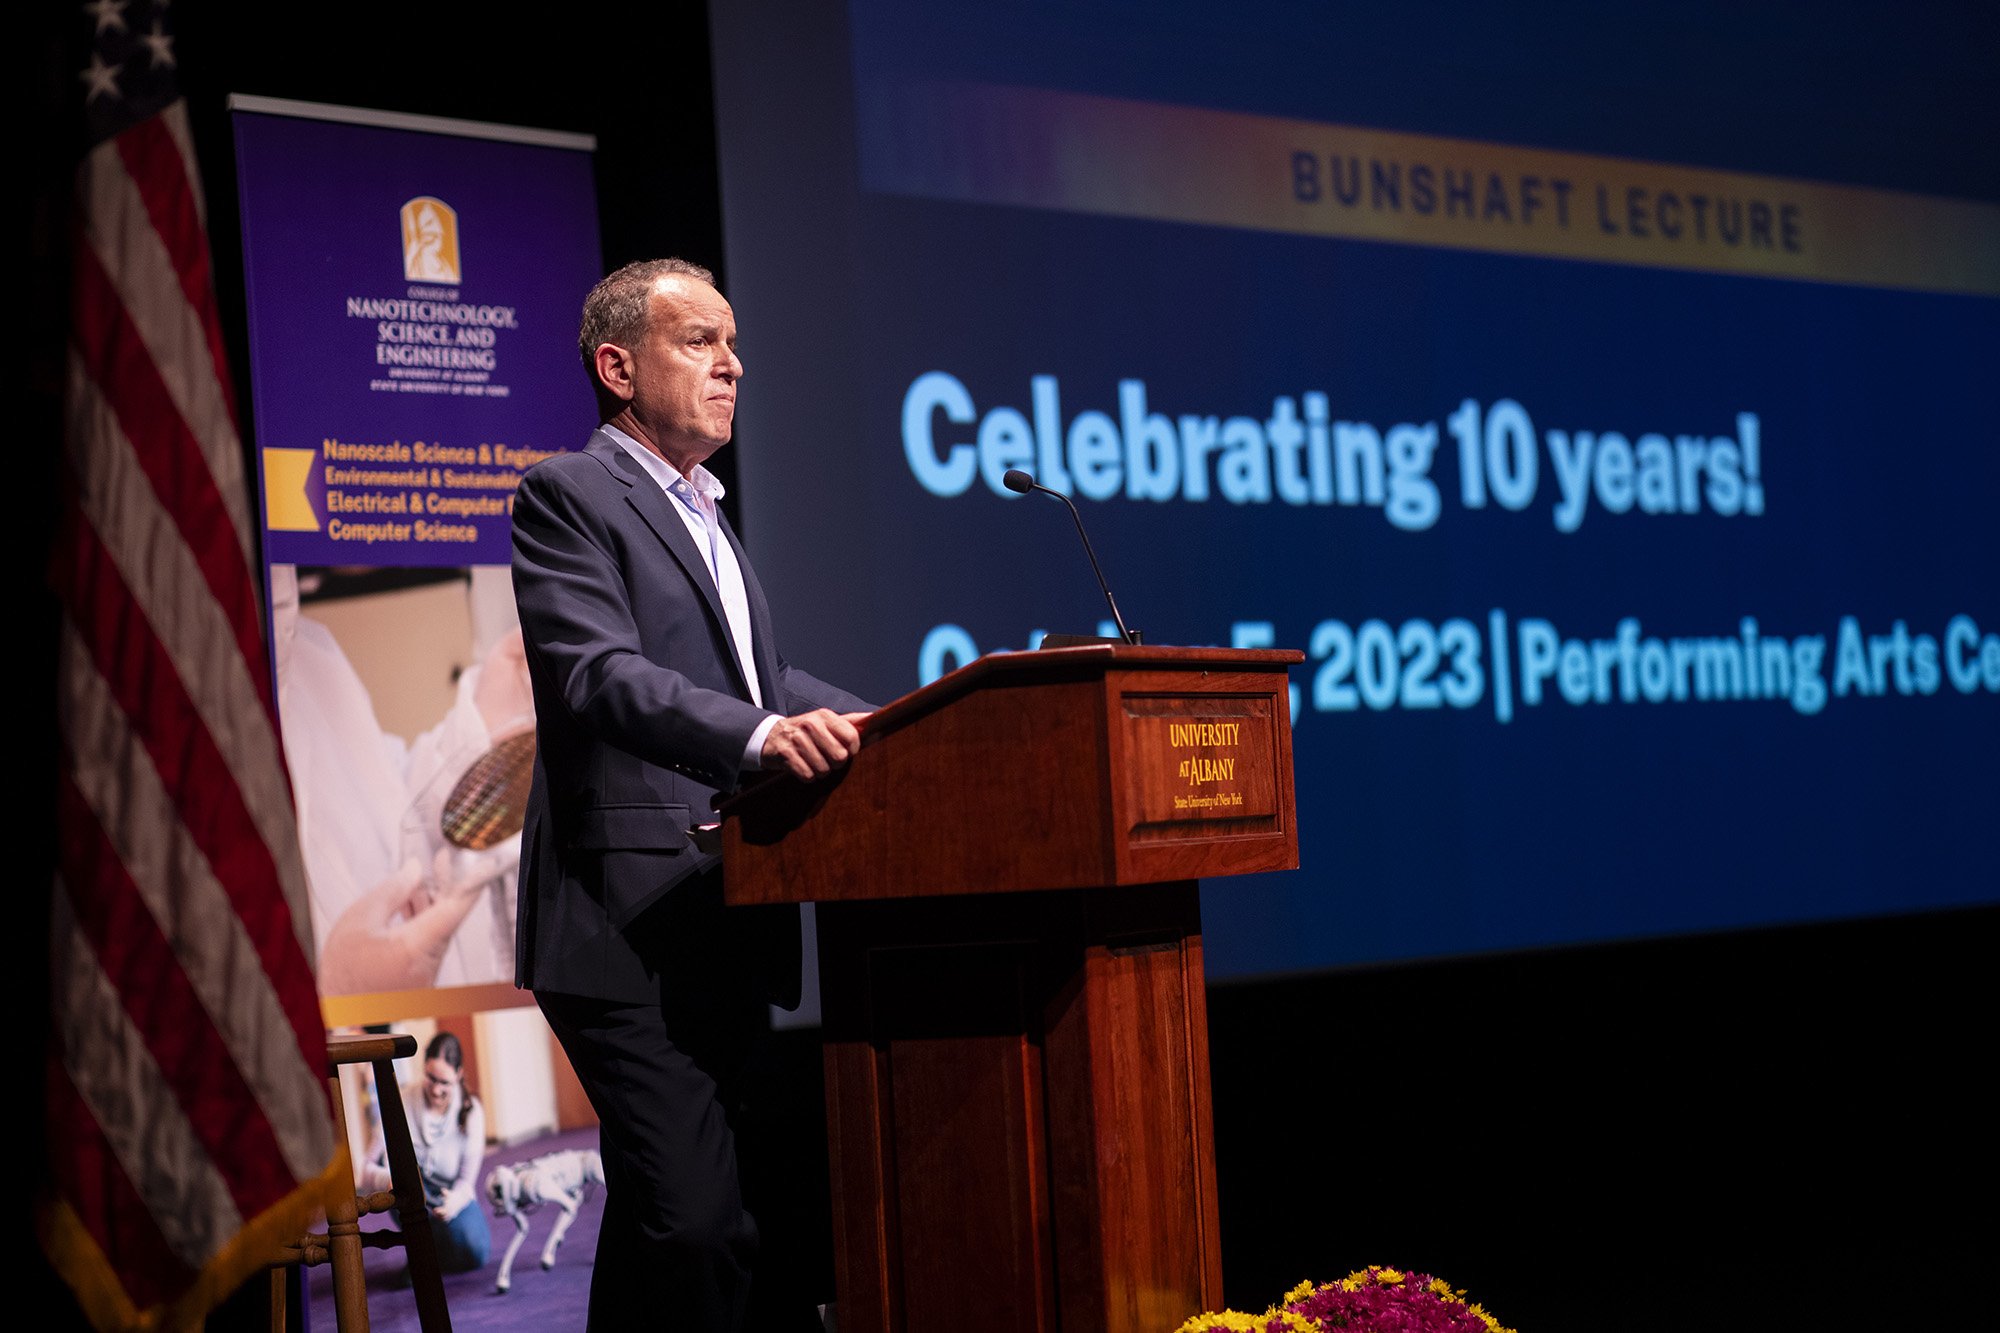 Albert Bunshaft '80 introduces former NASA Astronaut Leland Melvin at the 10th Annual Bunshaft Lecture at UAlbany's Performing Arts Center.